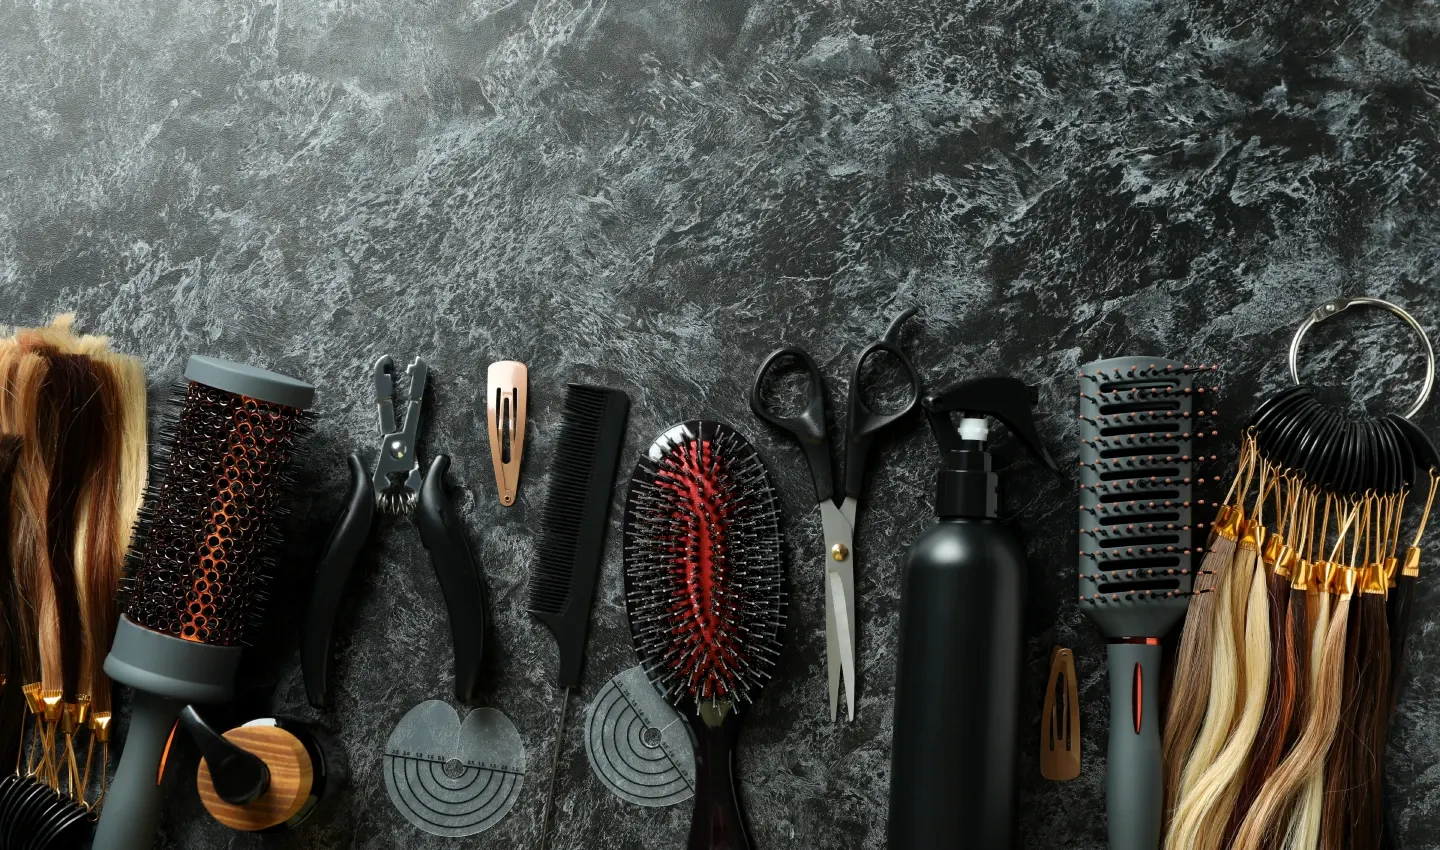 Collection of hair accessories, including headbands, hair ties, hair clips, scrunchies, hairbands, hairpins, hair combs, styling clips, hairbands with teeth, and bobby pins, on a black marble background.